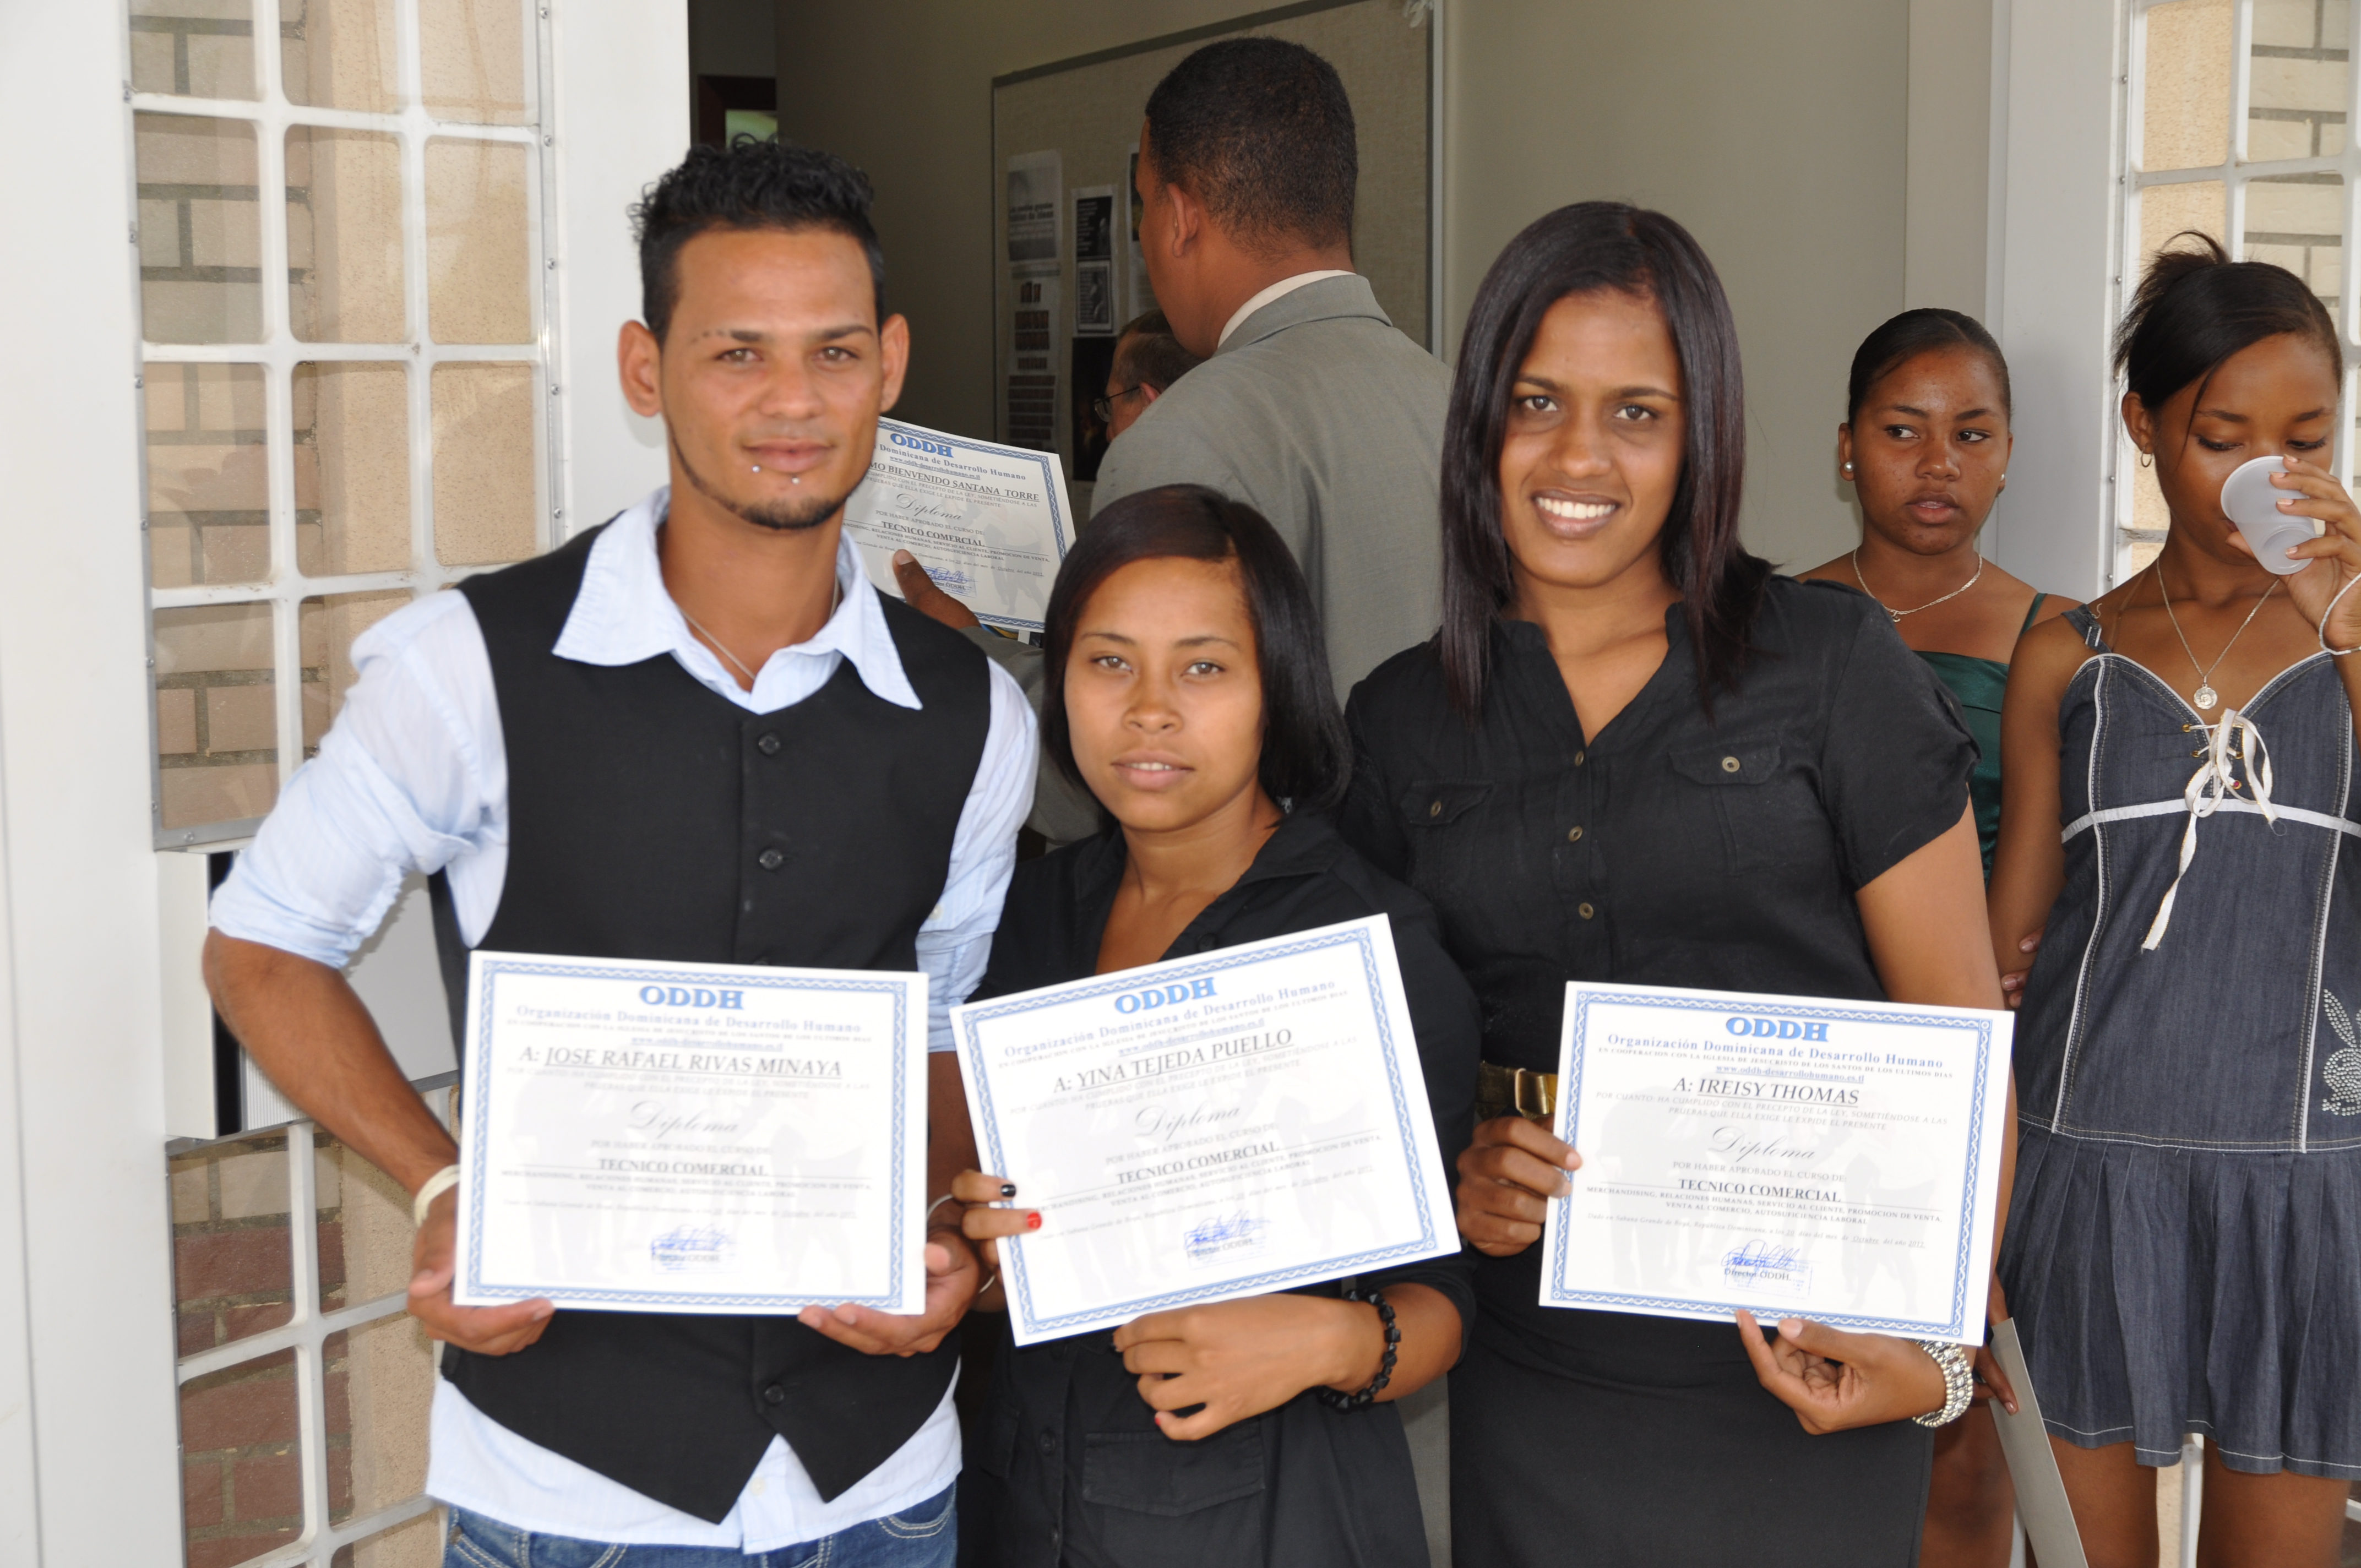 Dominican employment services